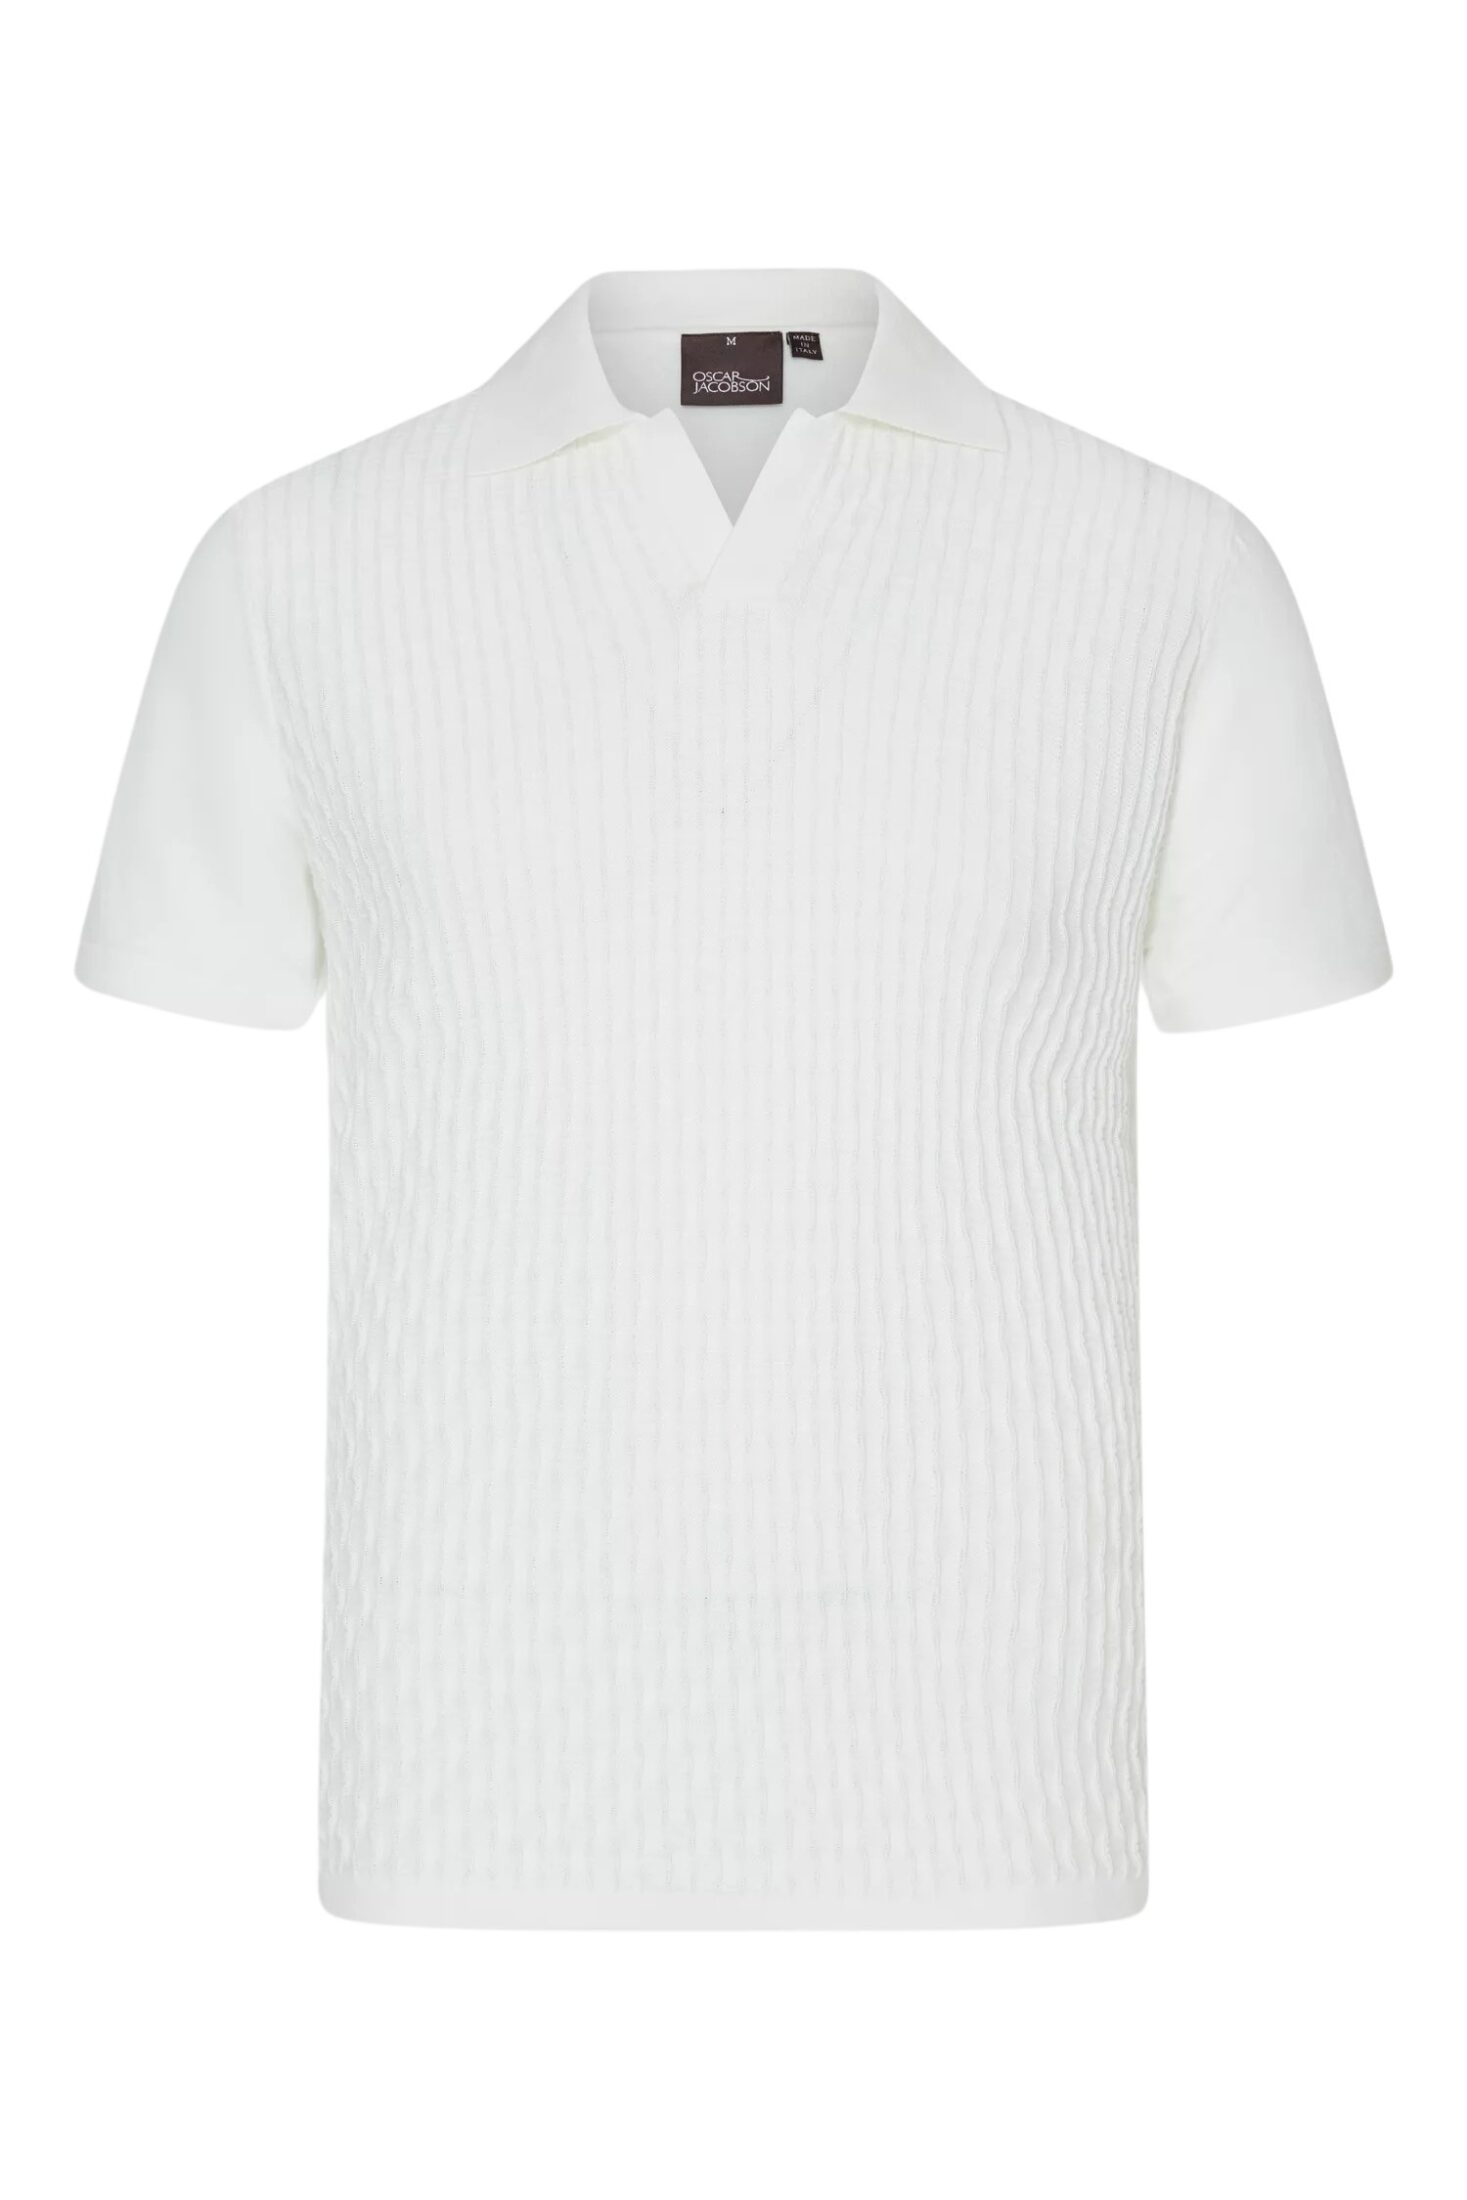 oscar-jacobson_mike-structured-poloshirt_snow-white_60691201_904_front